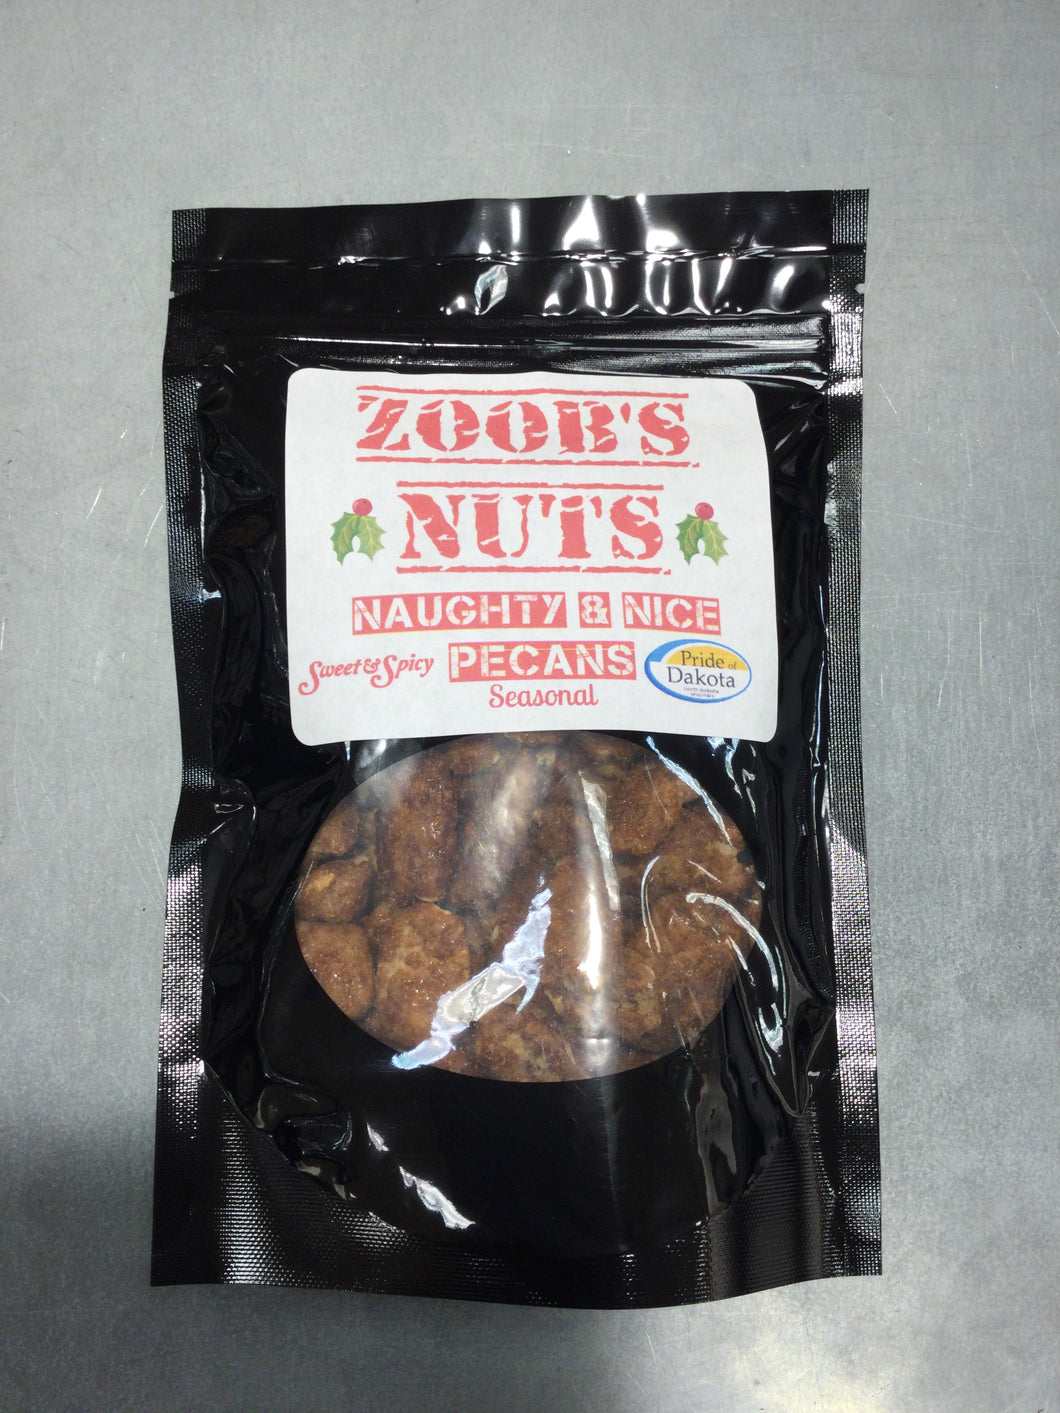 Zoob's Nuts Naughty and Nice Candied Pecans